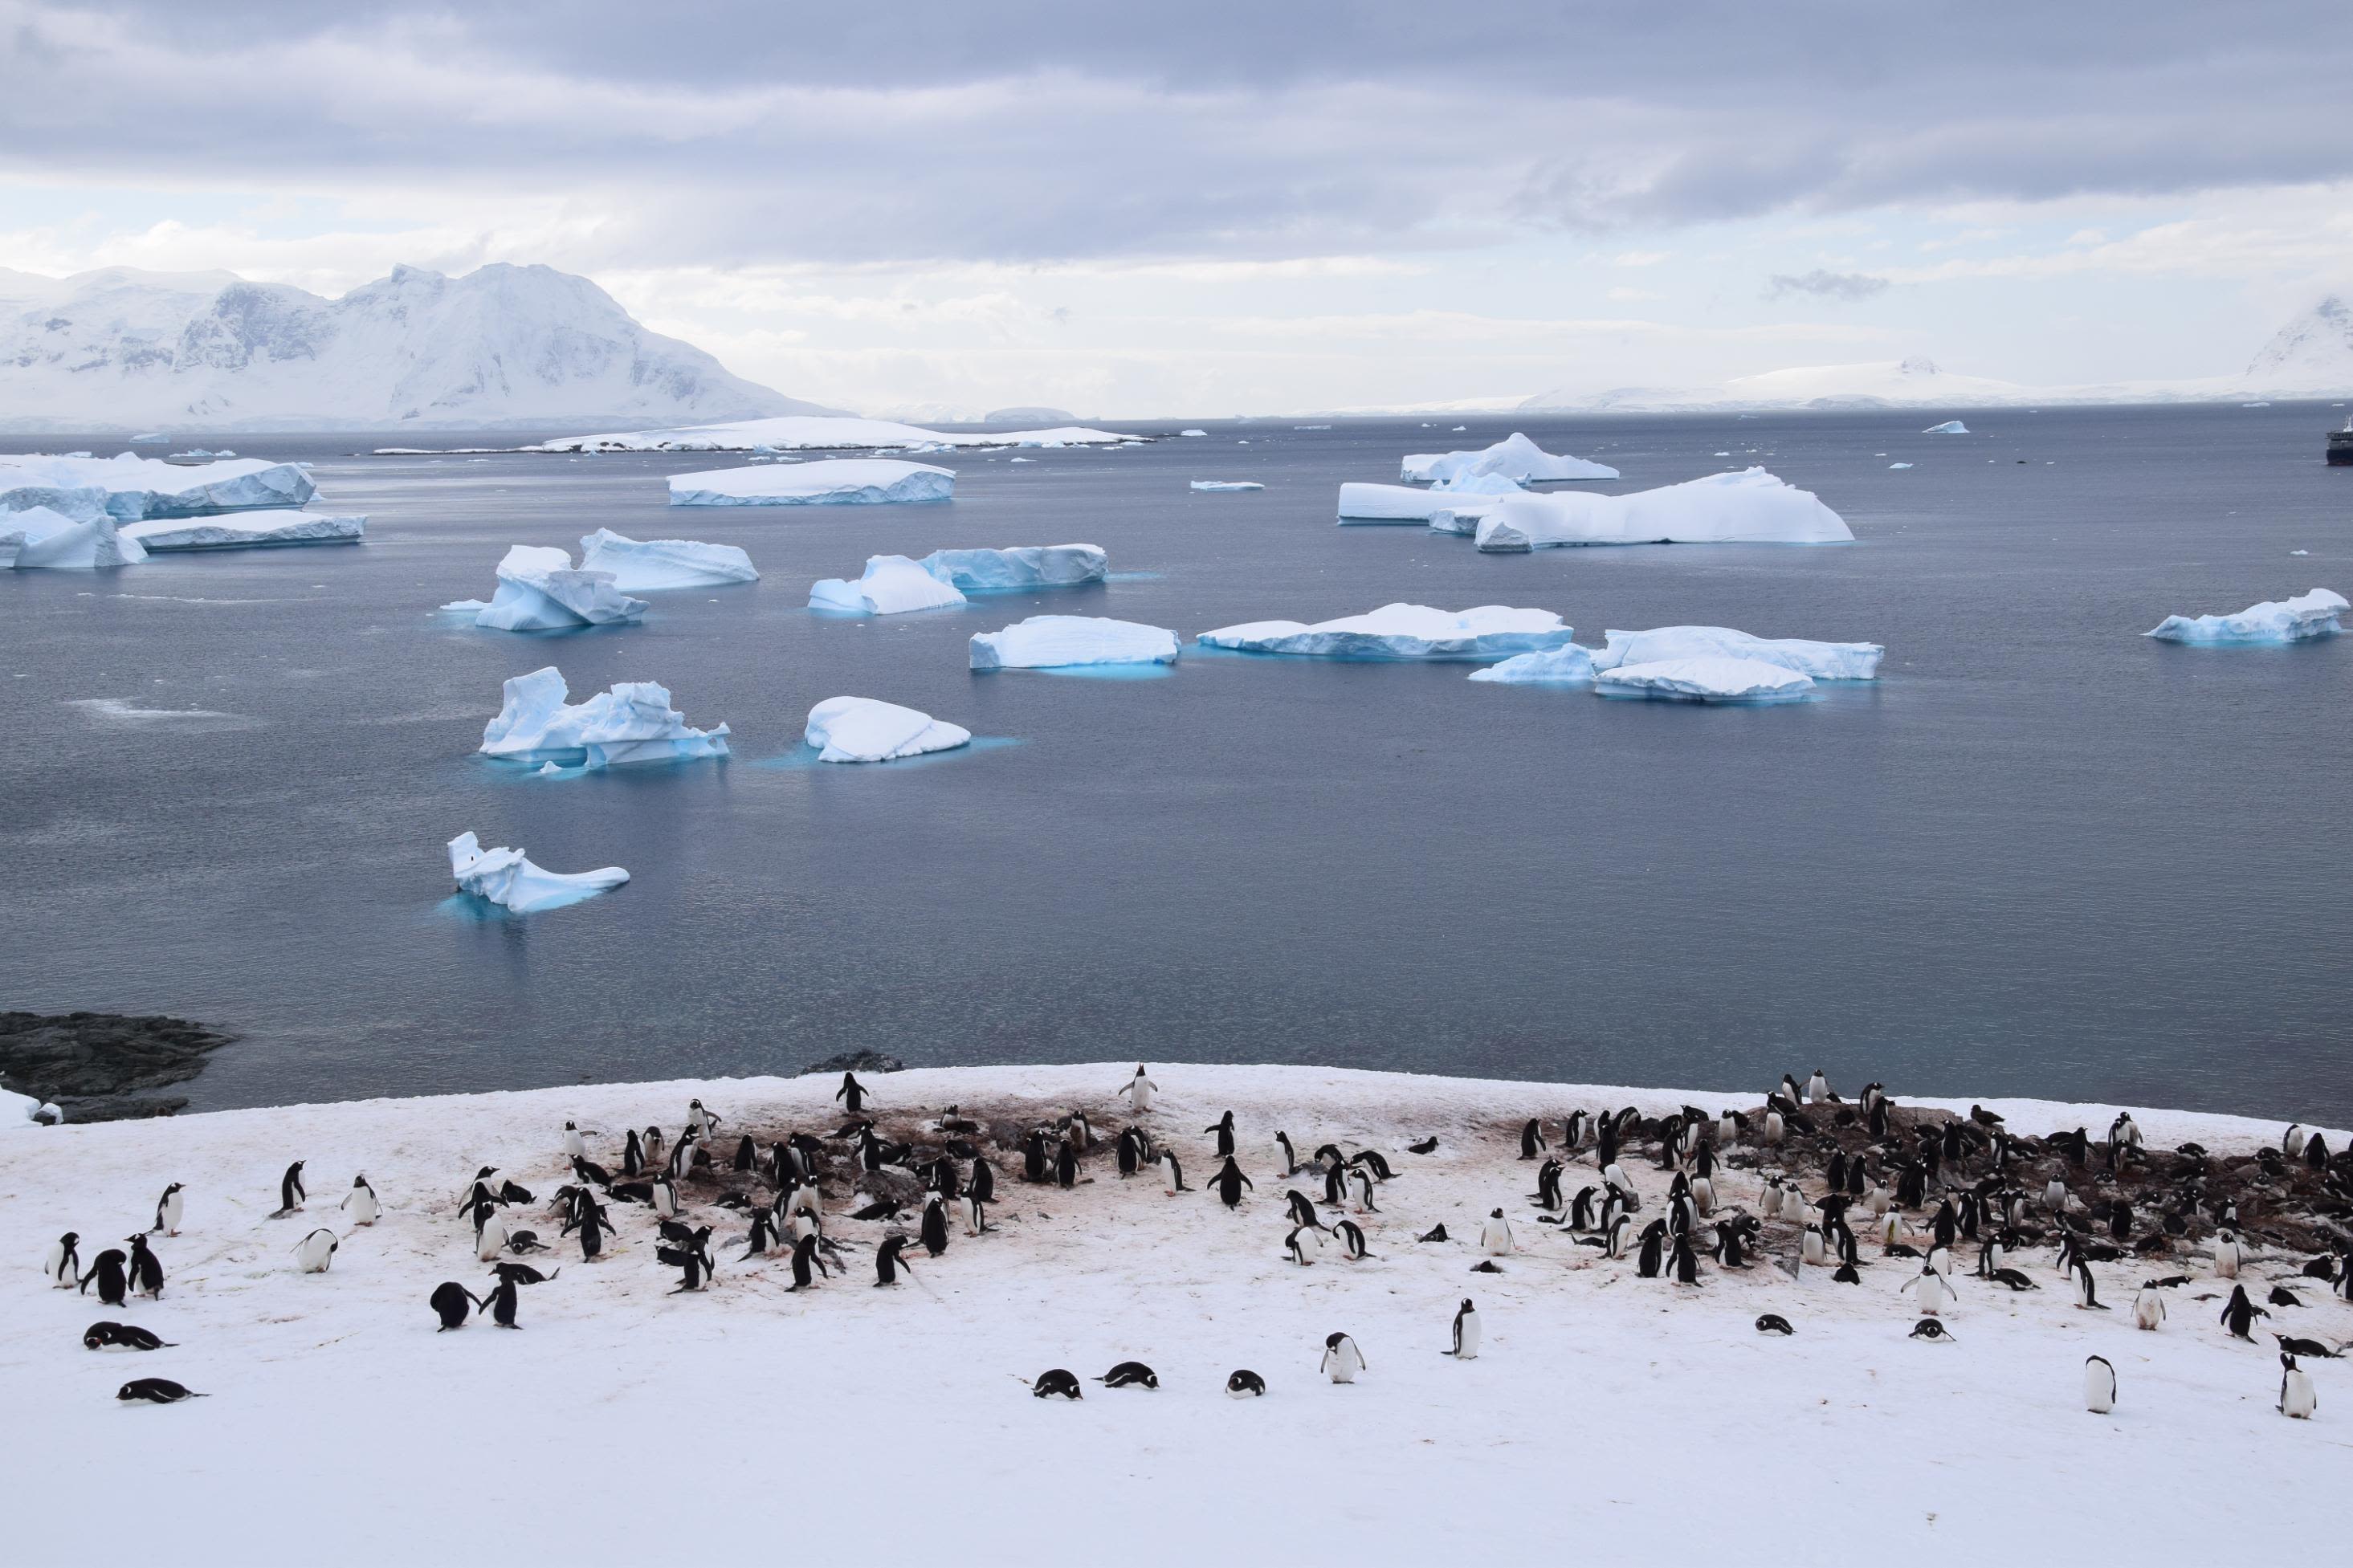 <strong>The locals:</strong> Expedition cruises to Antarctica get travelers close to local wildlife, including gentoo penguins.